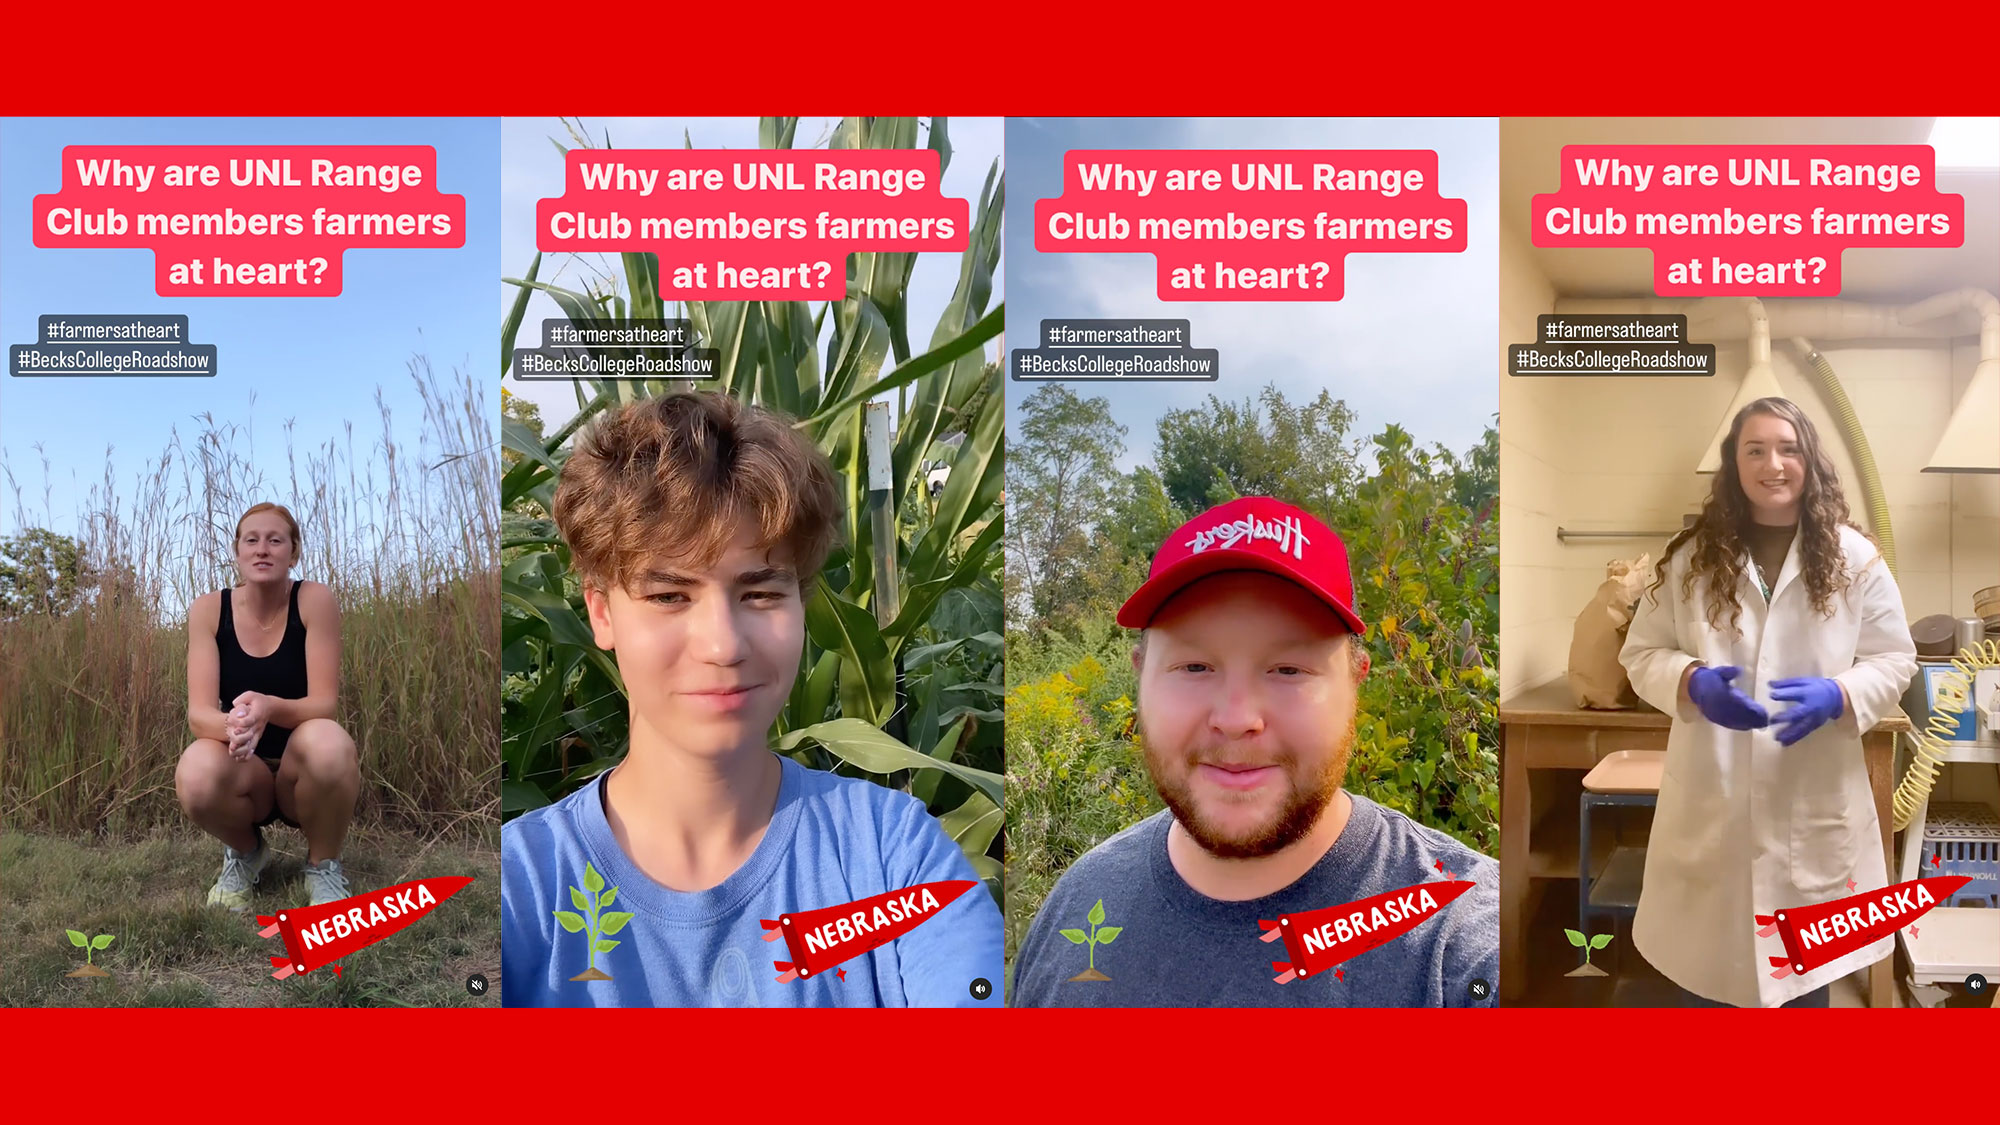 Range Management Club members Sheridan Wilson (from left), Lydia Regier, Jacob VanDress and Sadie Ference explain why ‘We’re all farmers at heart’ in an Instagram Reel produced by the club for Beck’s/U.S. Farm Report social media contest Sept. 15.